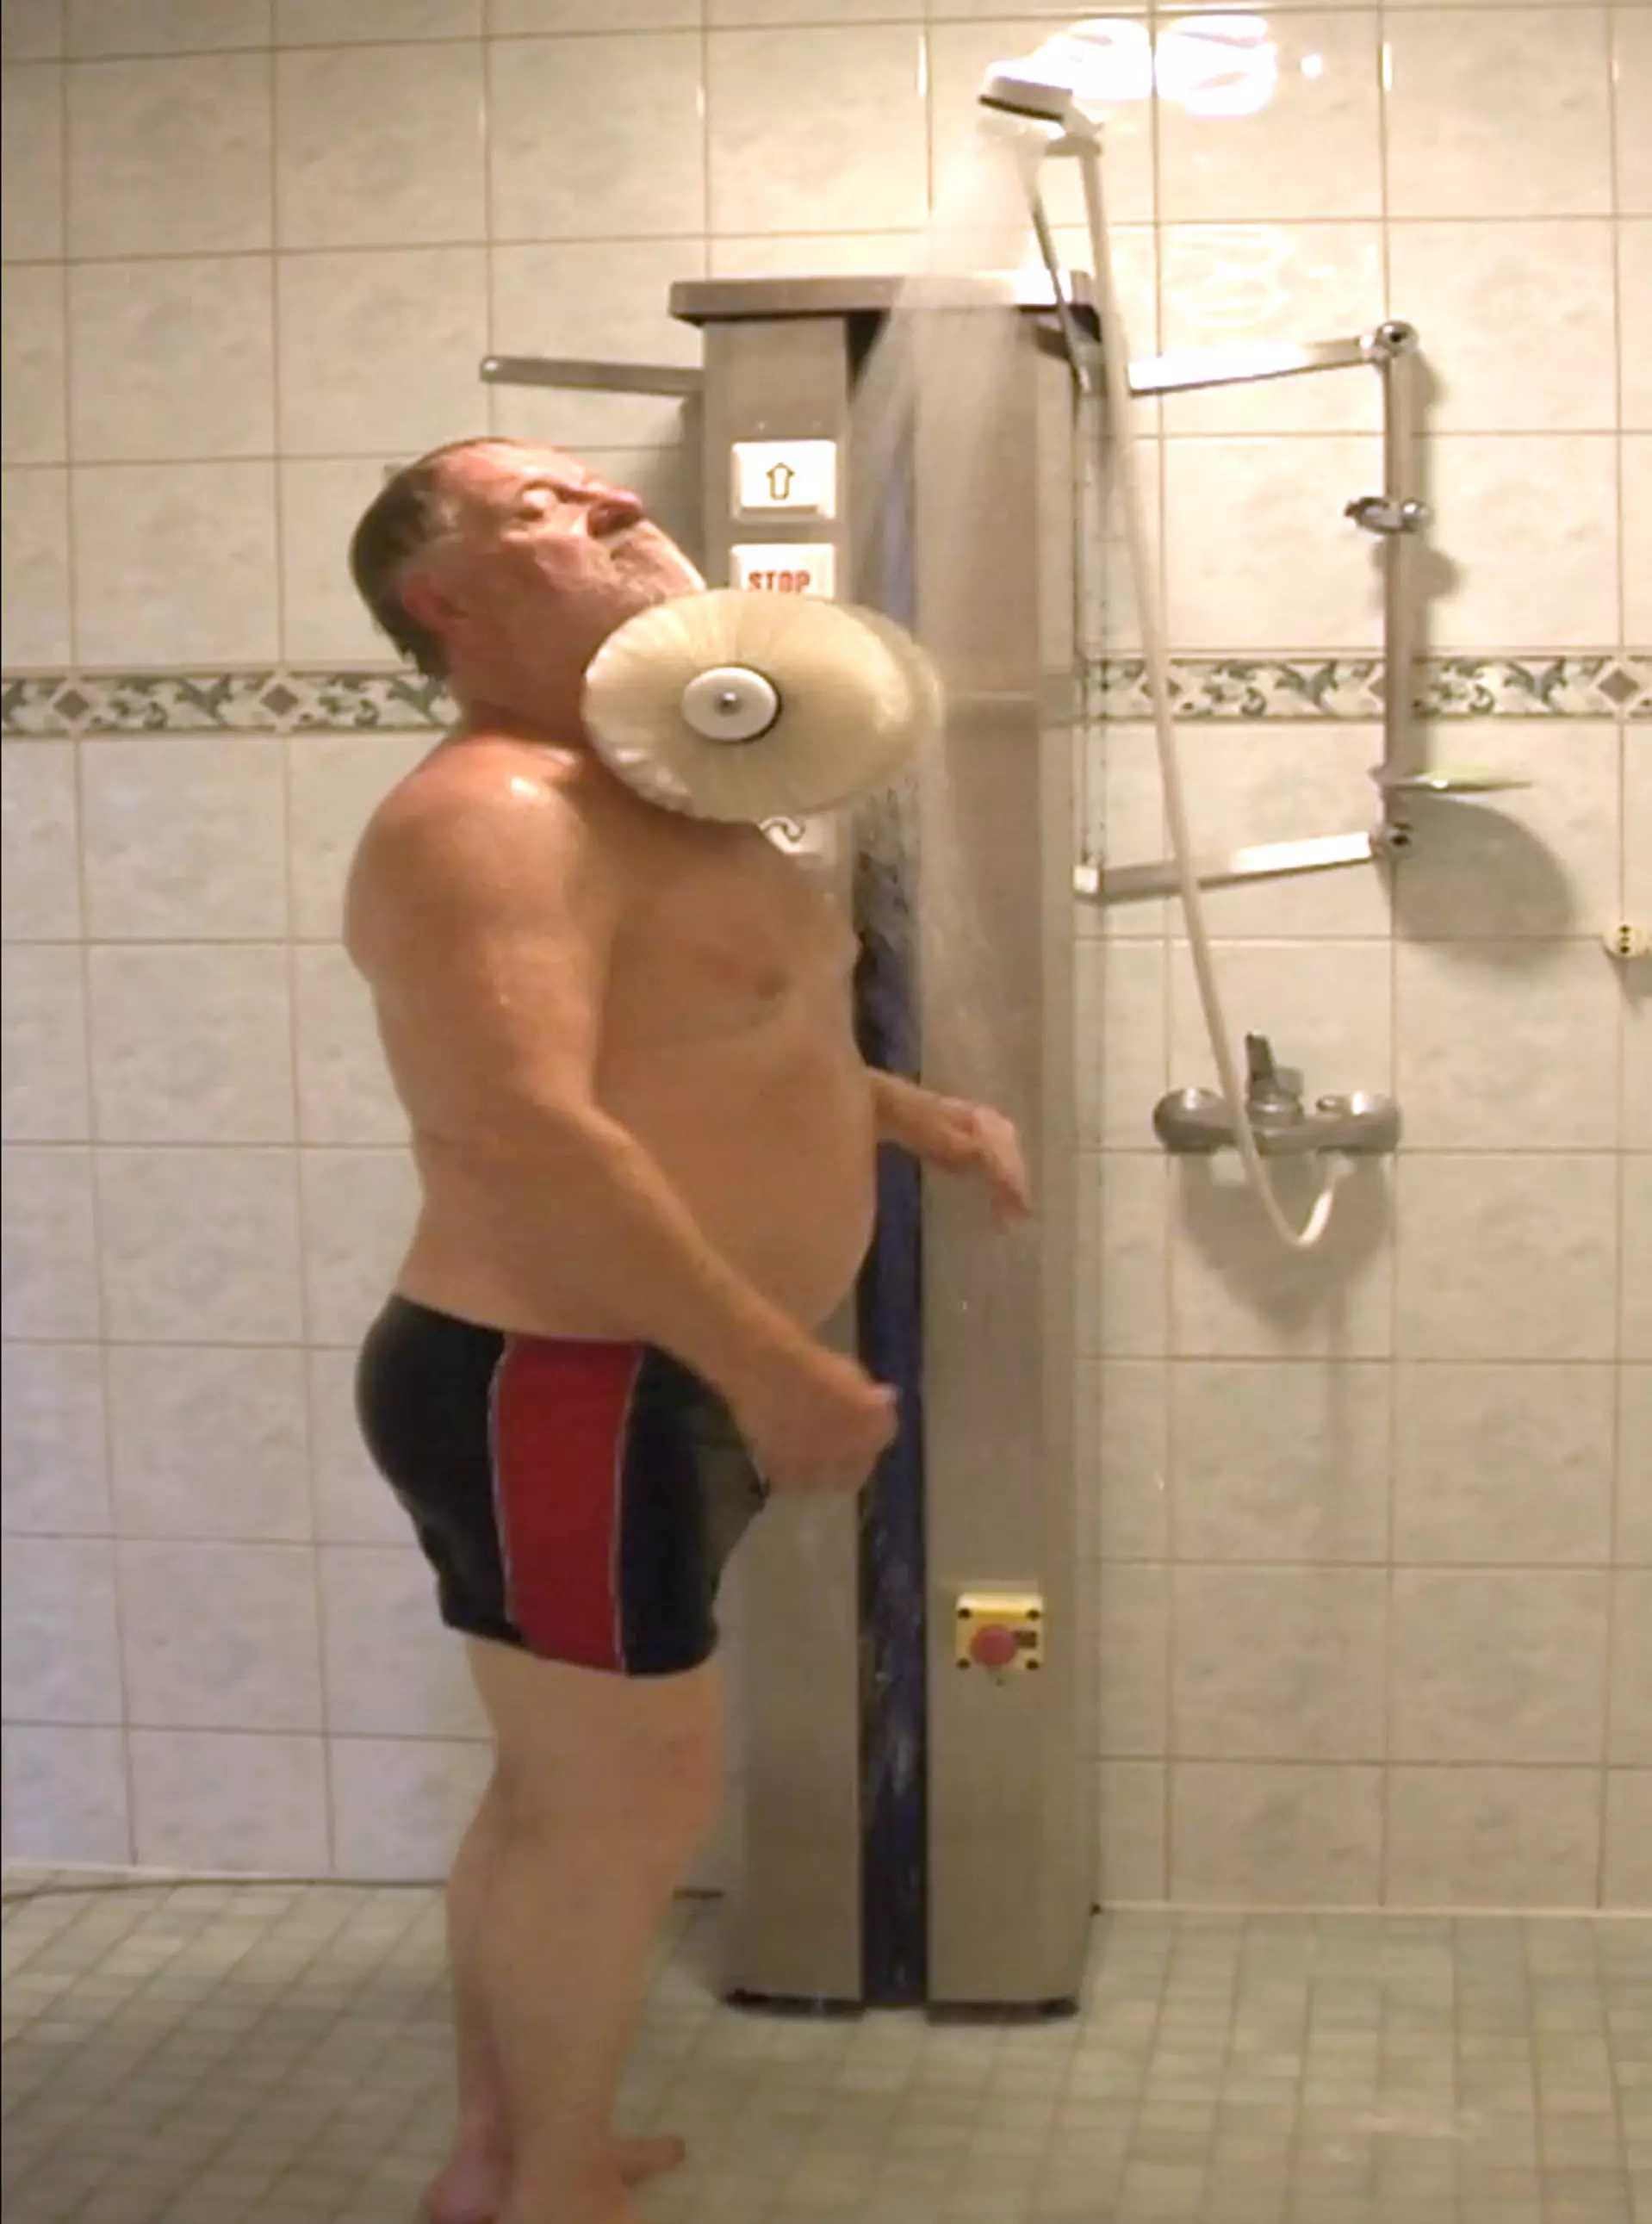 The Humanwash is designed to help people with mobility problems.